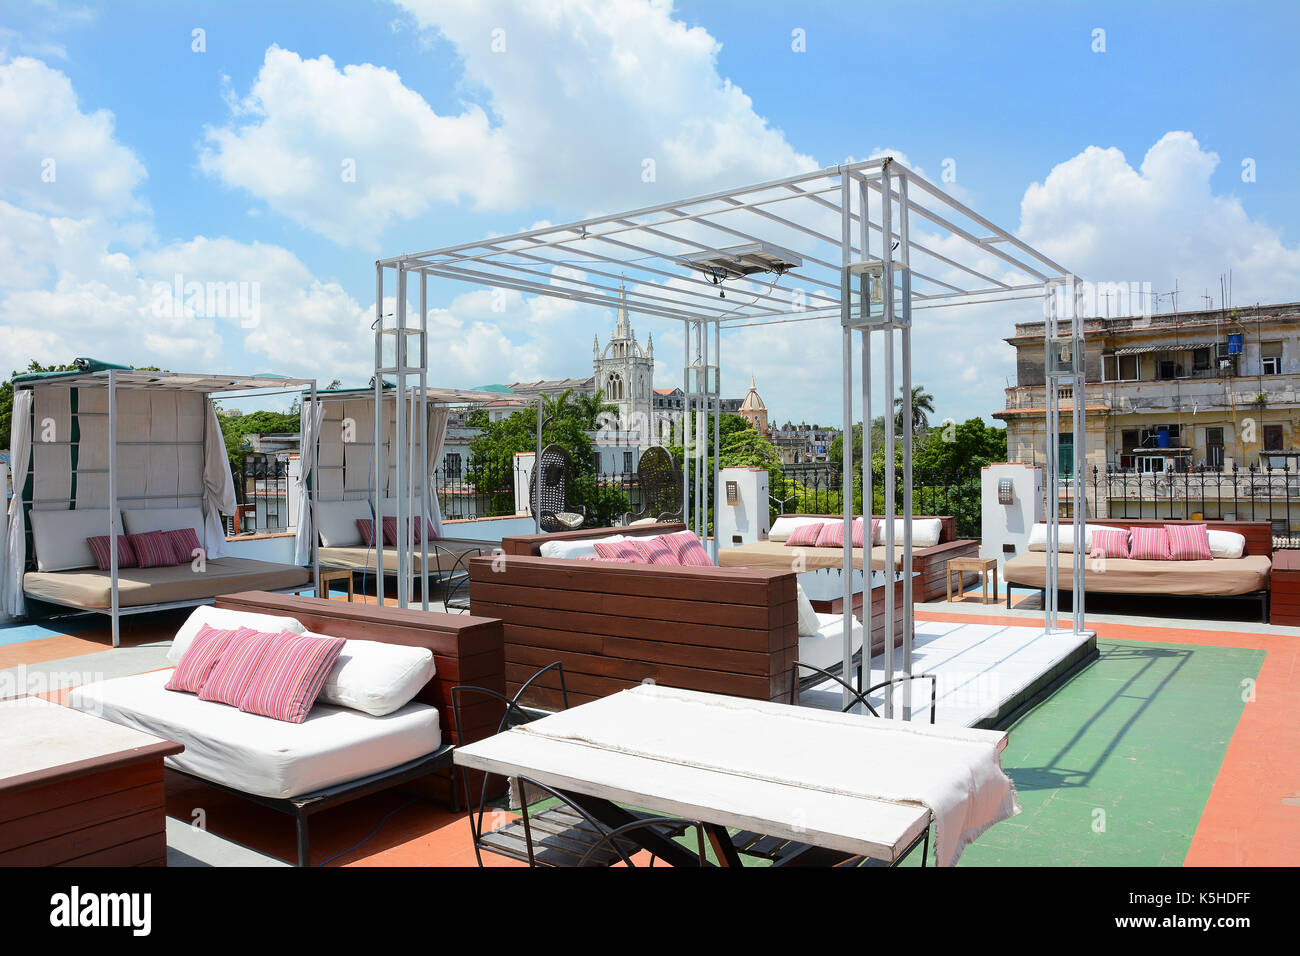 HAVANA, CUBA - JULY 20, 2016: Versus 1900 Restaurant rooftop patio. Located in the most central area of the city, it has different spaces to meet th Stock Photo